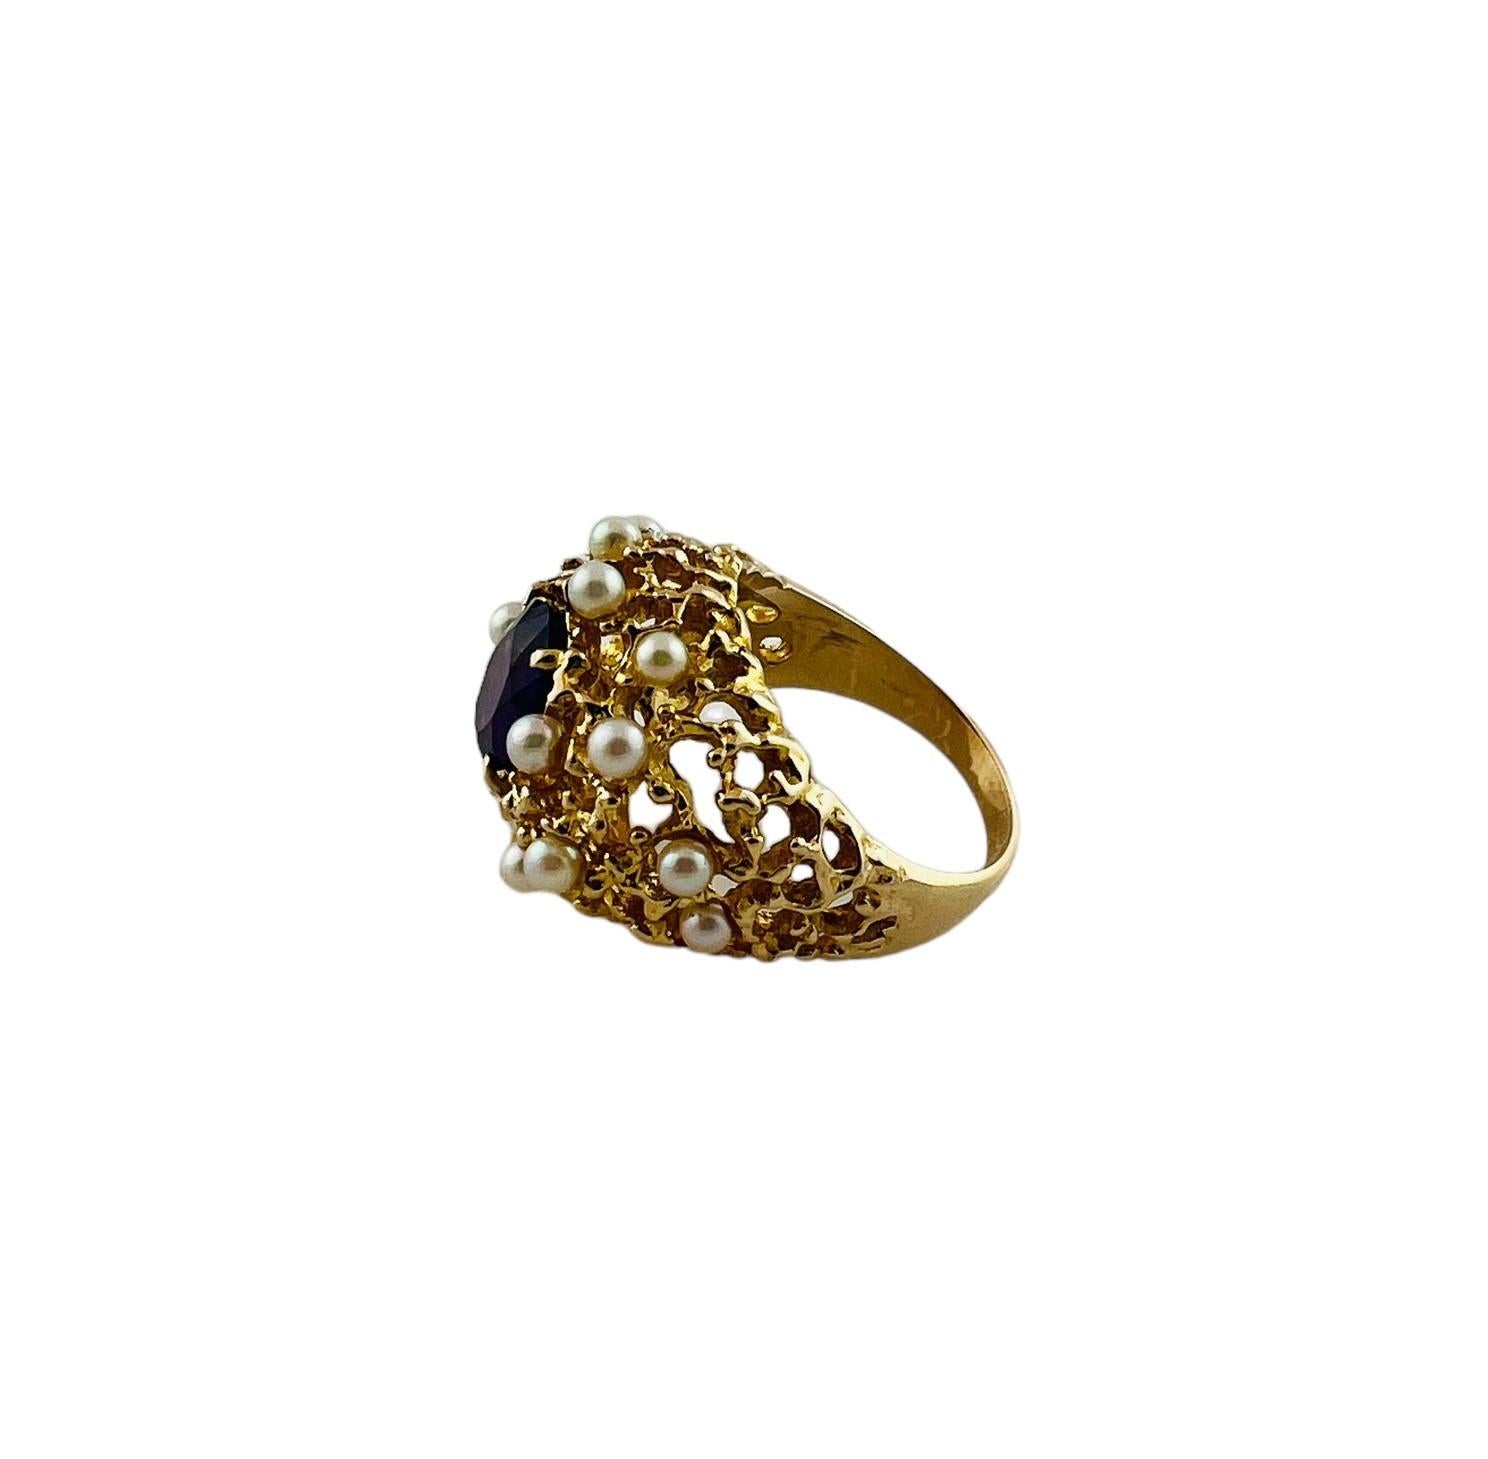 14K Yellow Gold Oval Faceted Amethyst and Pearl Ring 

This beautiful ring is set in 14K yellow gold. 

The center stone is a faceted oval purple amethyst stone surrounded by 16 small white pearls in an open dome design

Size 6.75

2.7mm